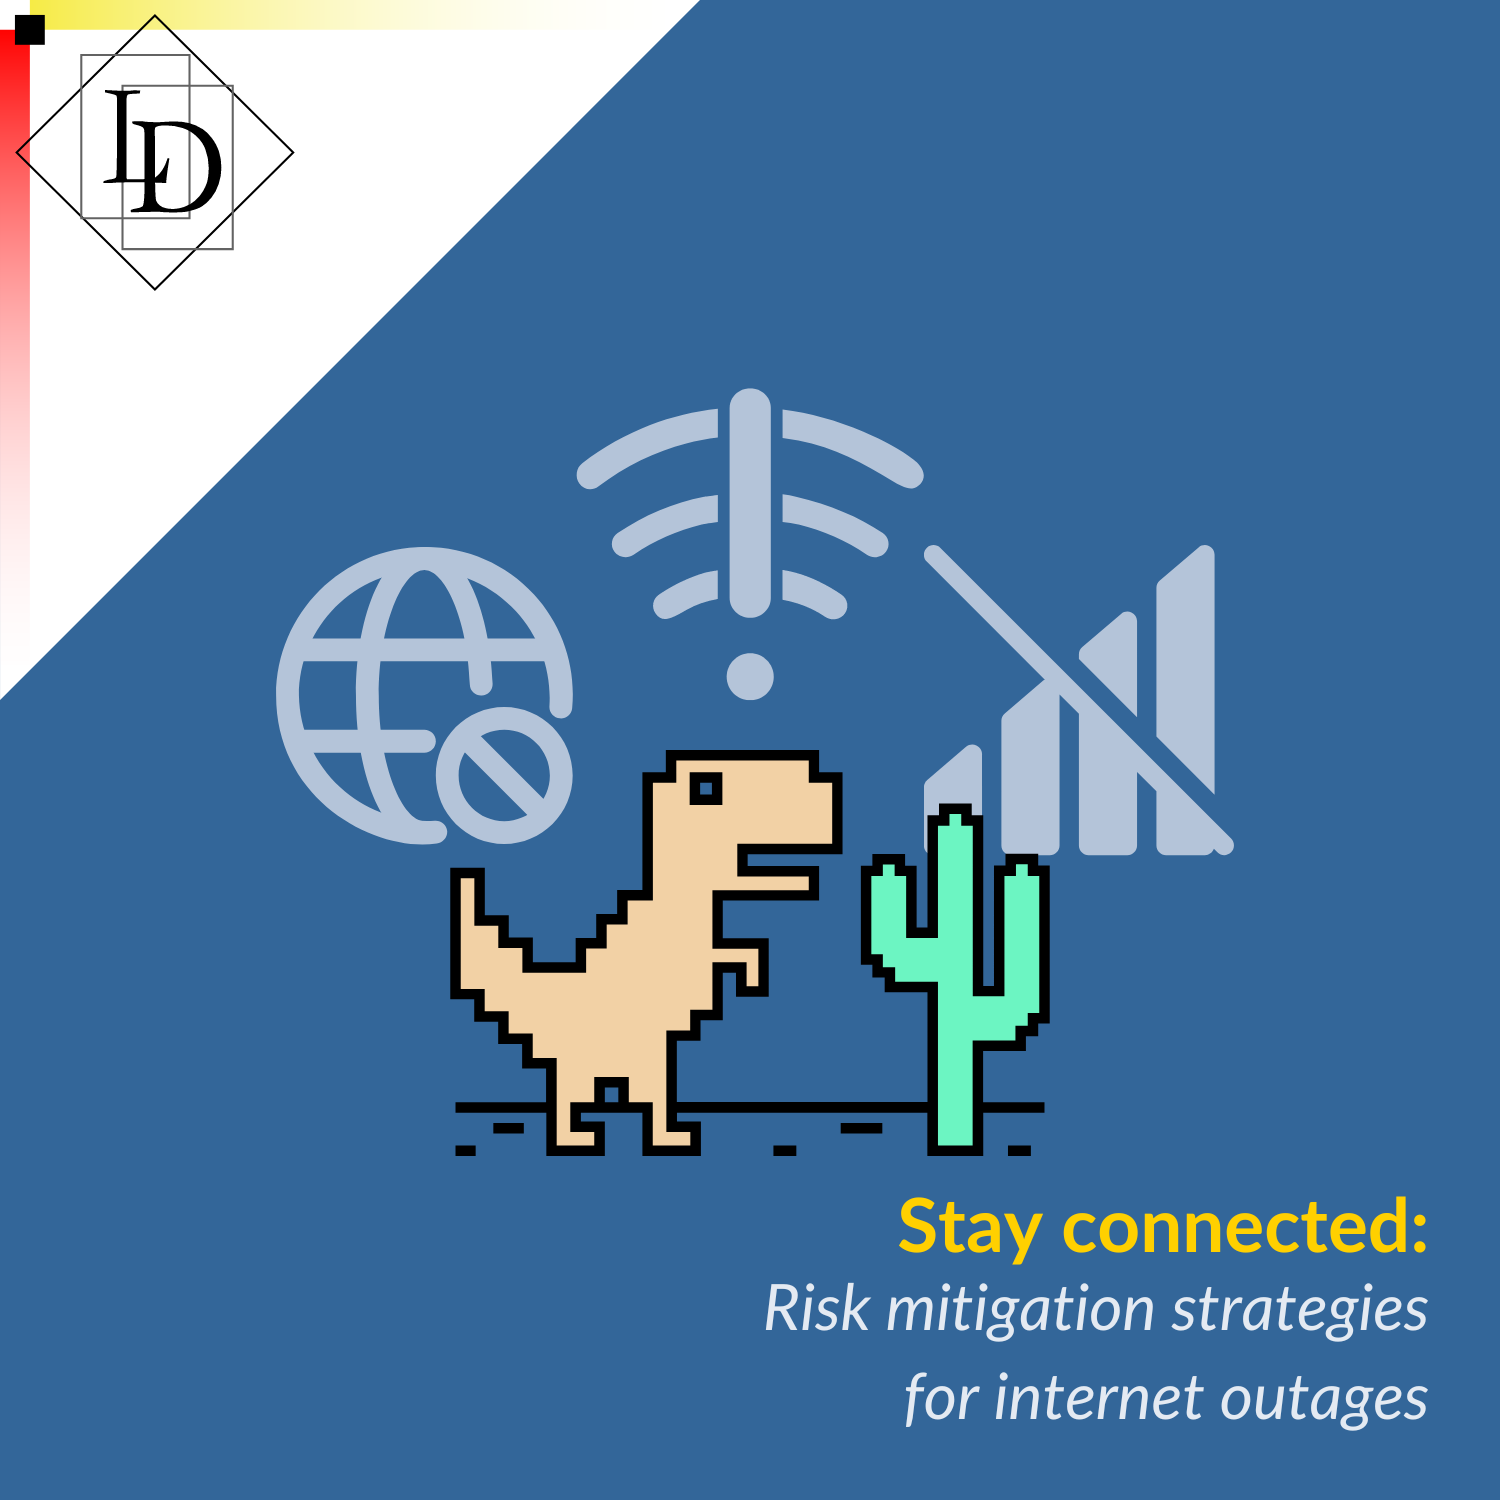 The image displays several icons, each of which indicates that a particular type of internet connection is not available. The caption reads "Stay connected: Risk mitigation strategies for internet outages".